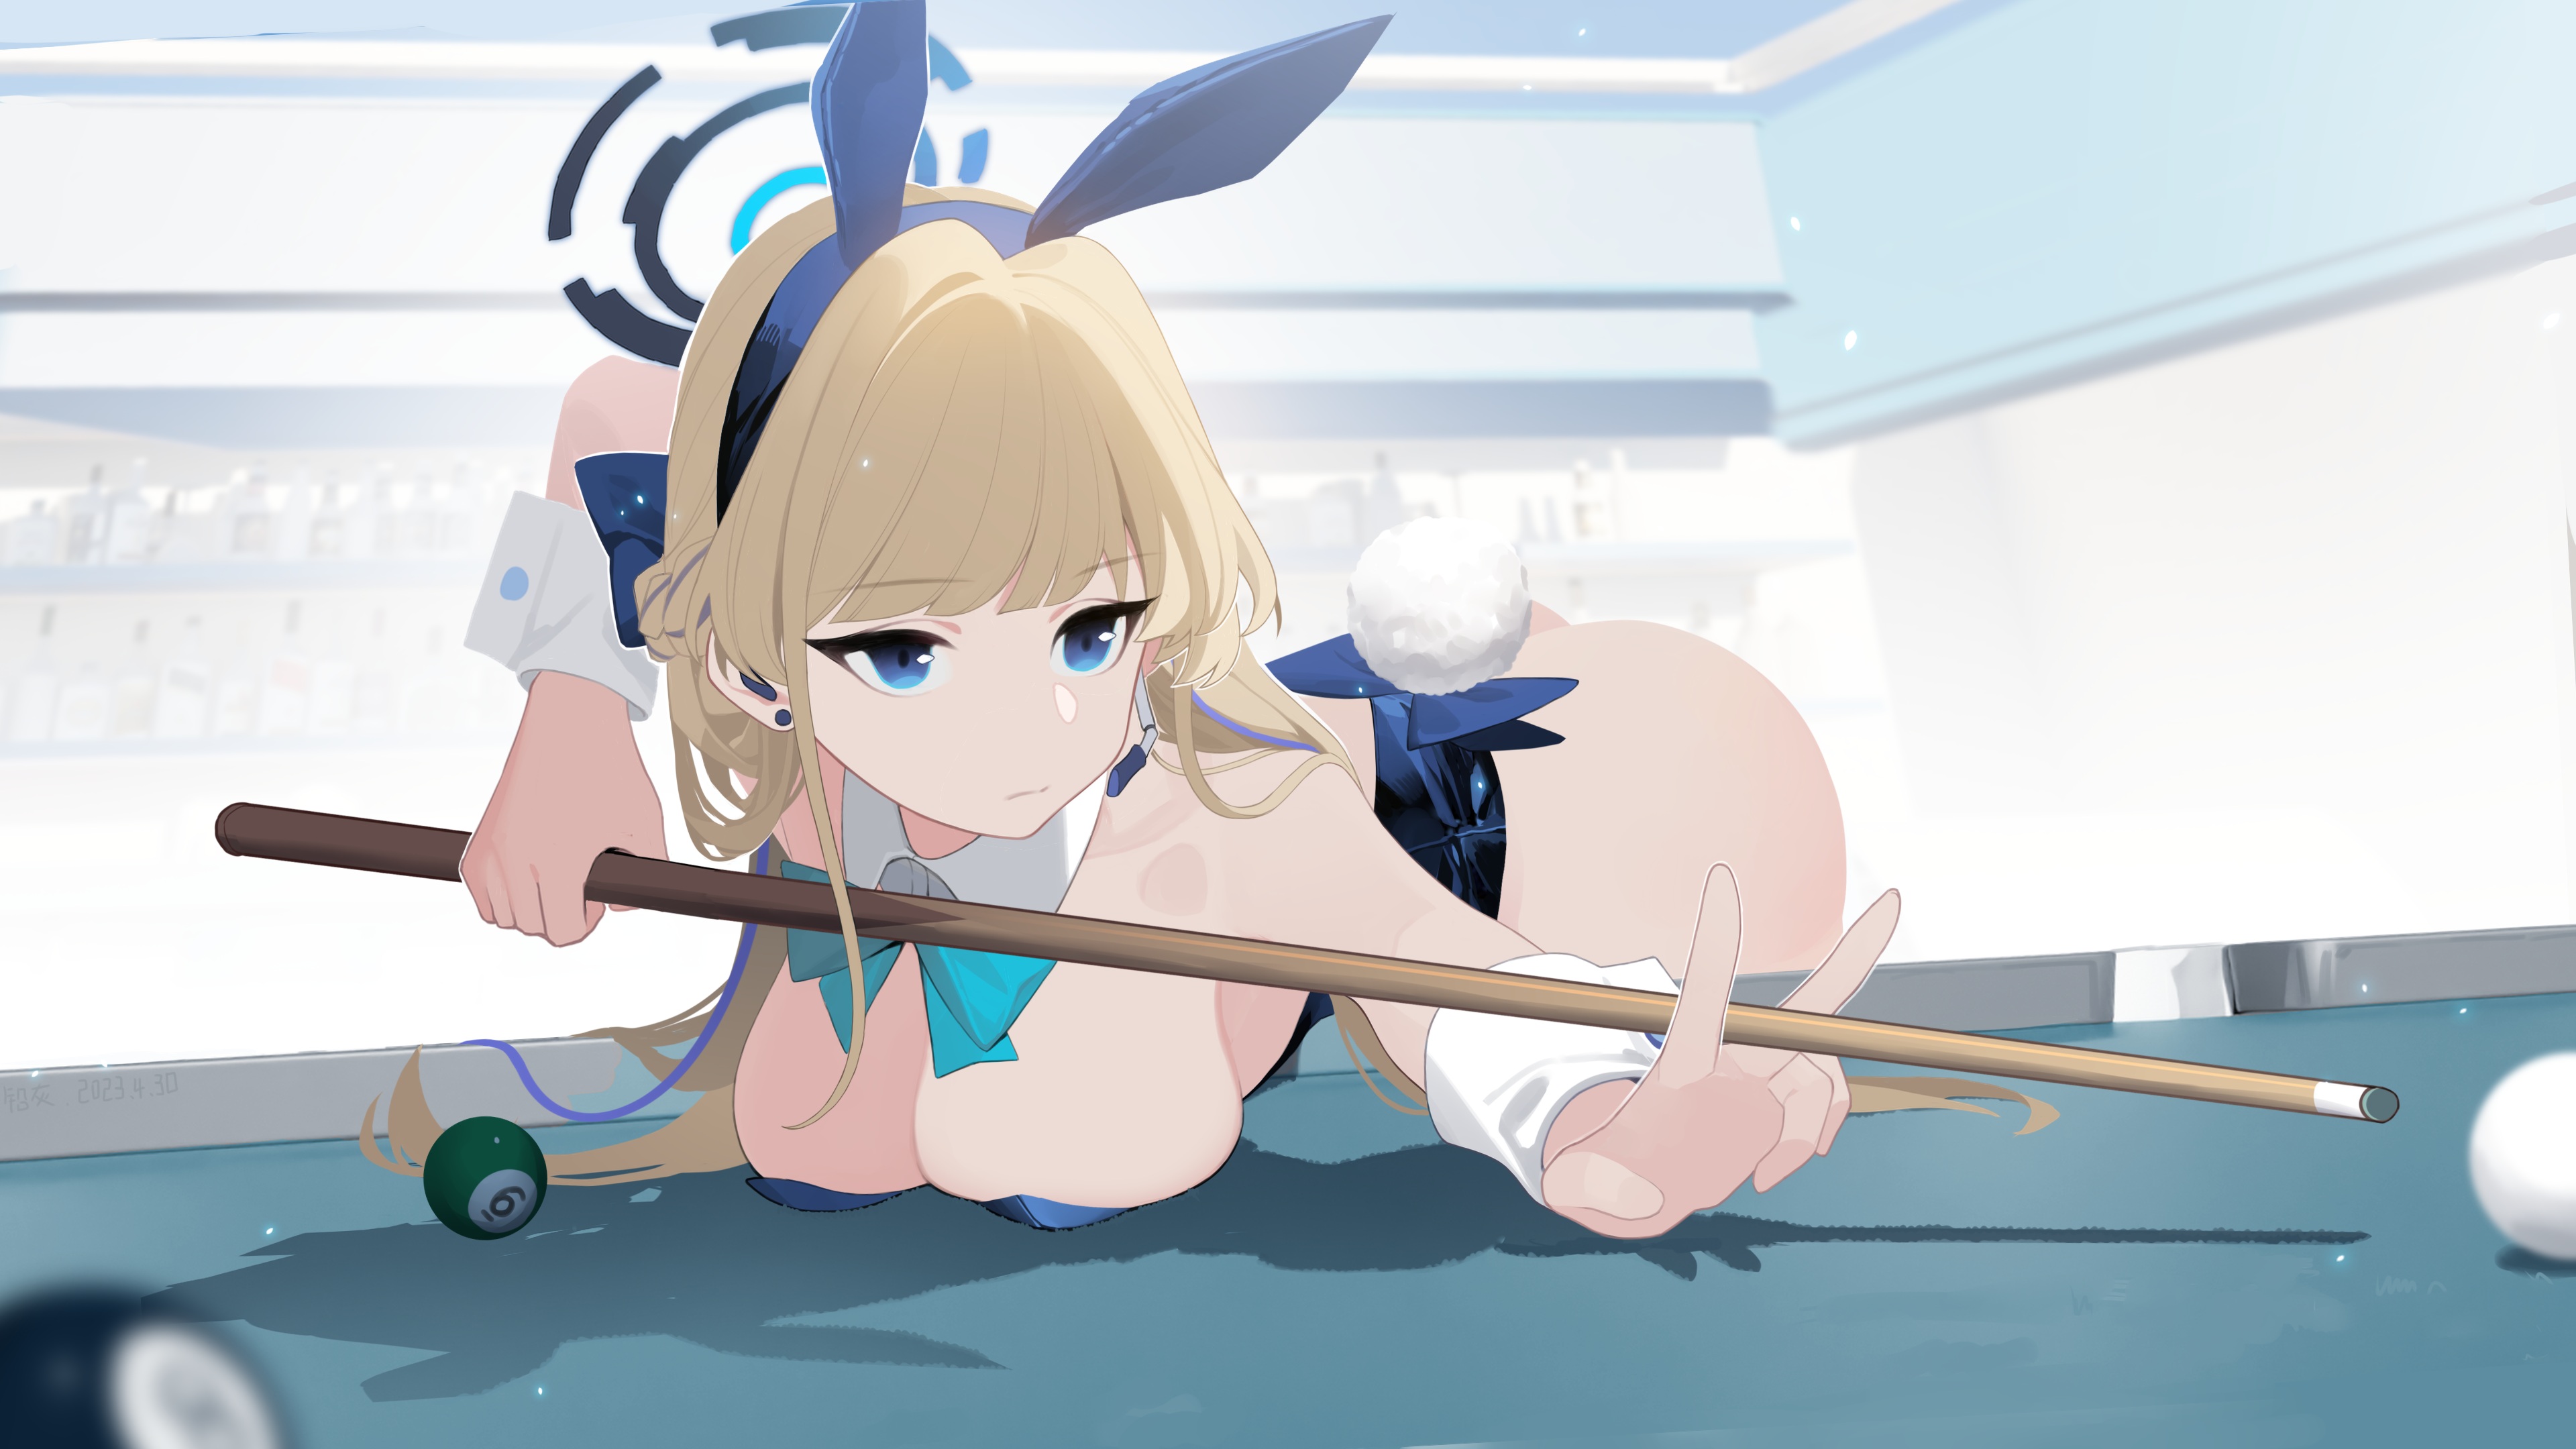 Anime 3840x2160 anime anime girls big boobs bent over Asuma Toki (Blue Archive) Blue Archive qianhui looking away long hair blonde pool table blue eyes blue bow bow tie bunny suit bunny ears bunny tail closed mouth leotard blue leotard ball wrist cuffs cleavage pressed boobs numbers bright boobs on table